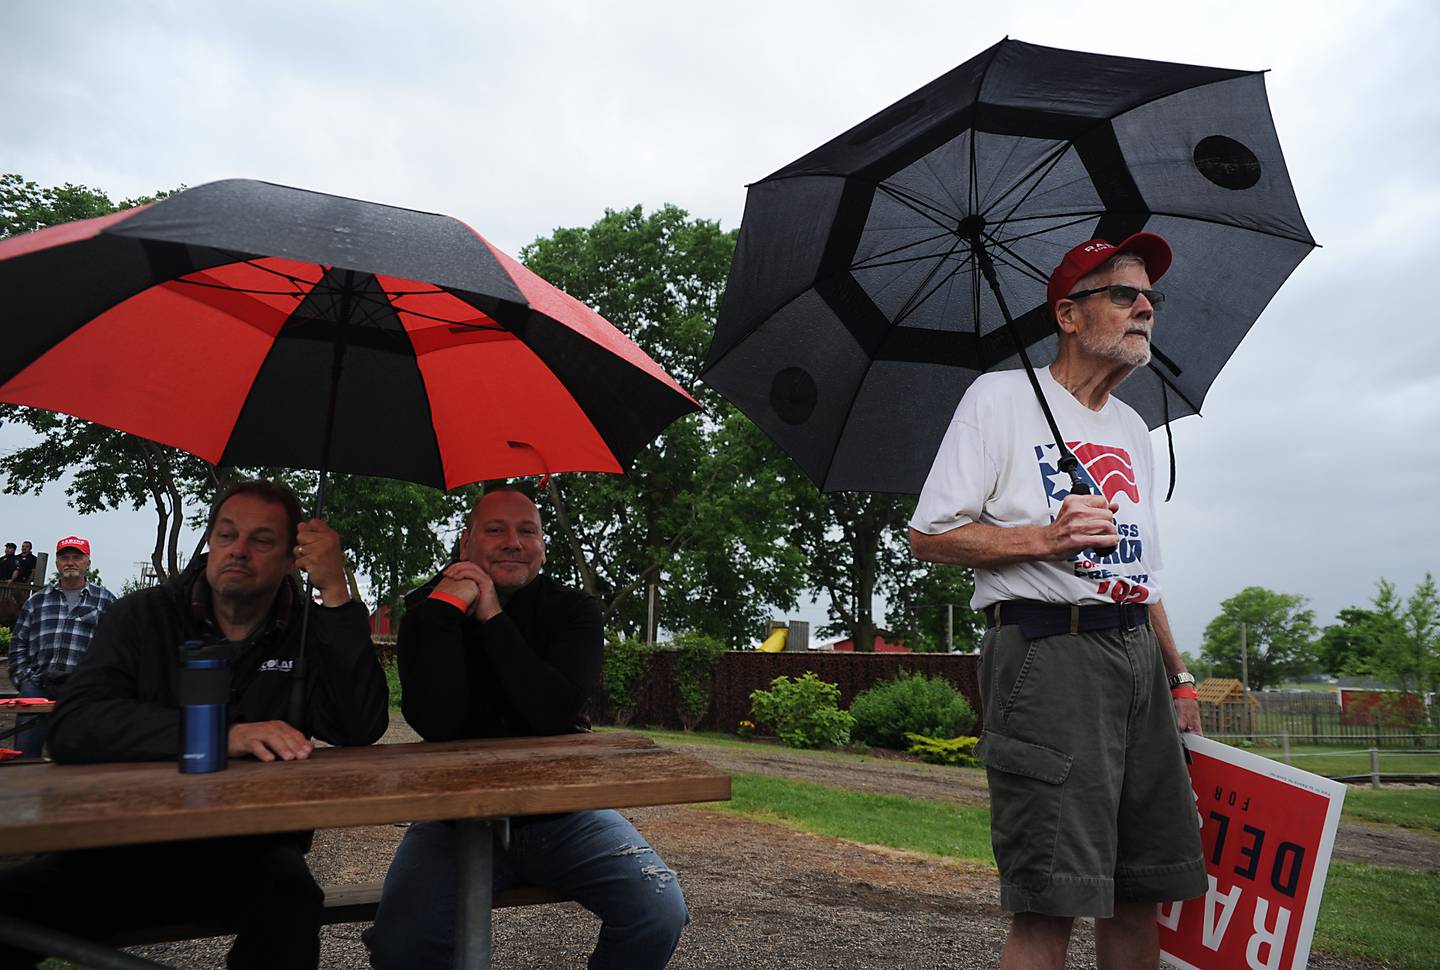 Larry Nelson, right, of McHenry, and others try to keep dry as they listen to the views of Republican gubernatorial candidates during the Grand Old Party at the Farm Forum on Saturday, June 4, 2022, at Richardson Farm, 909 English Prairie Road, in Spring Grove. The all day event forum featured Republican candidates up and down the ticket on multiple stages.